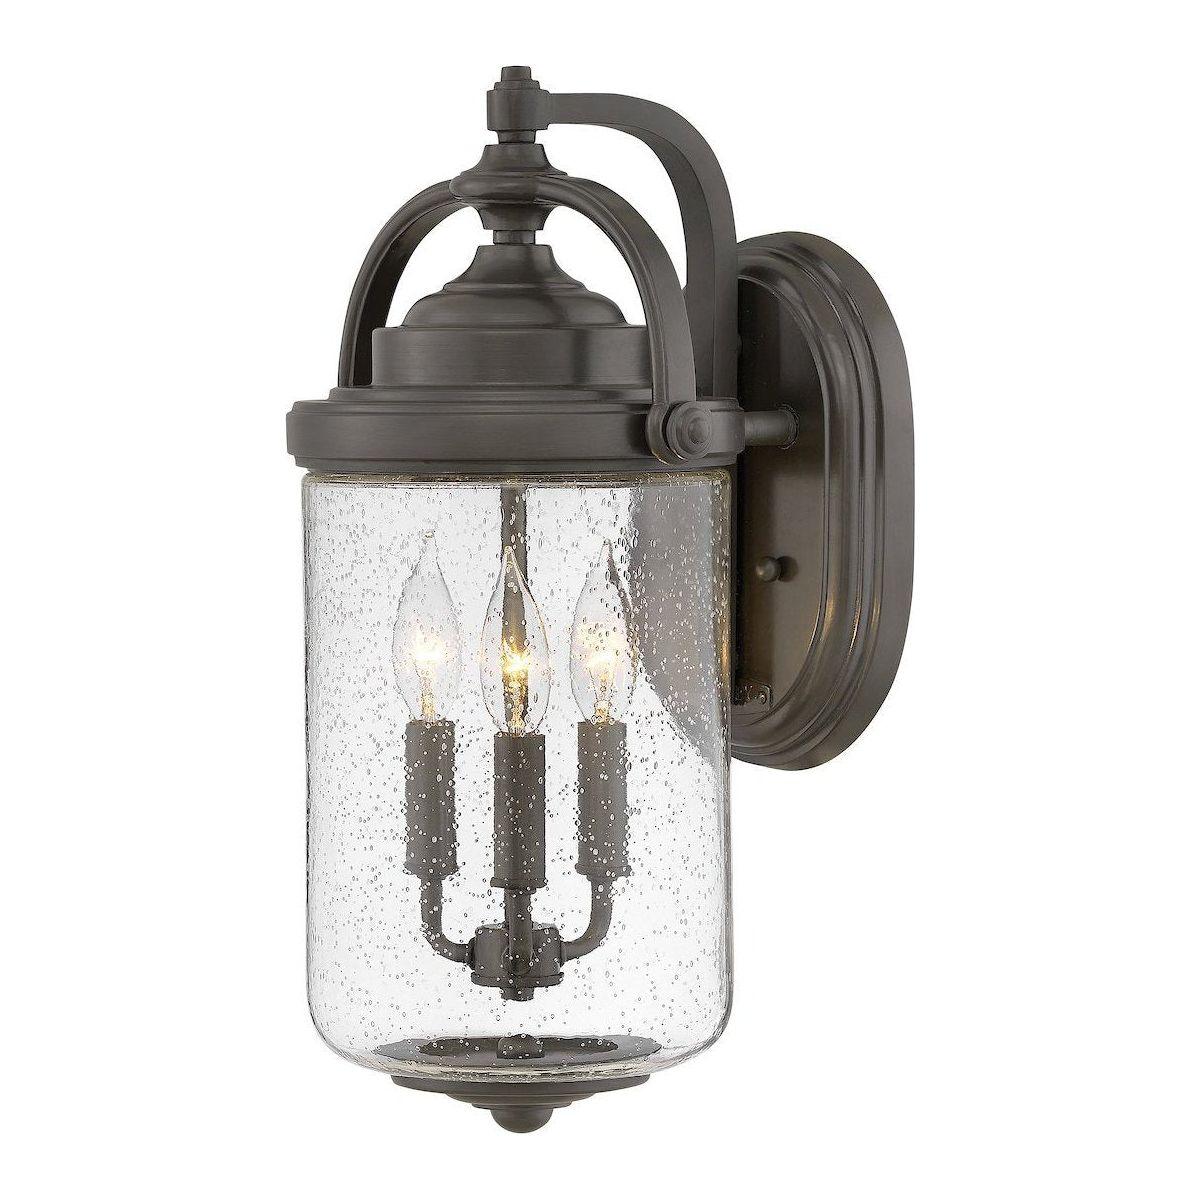 Hinkley - Willoughby Outdoor Wall Light - Lights Canada